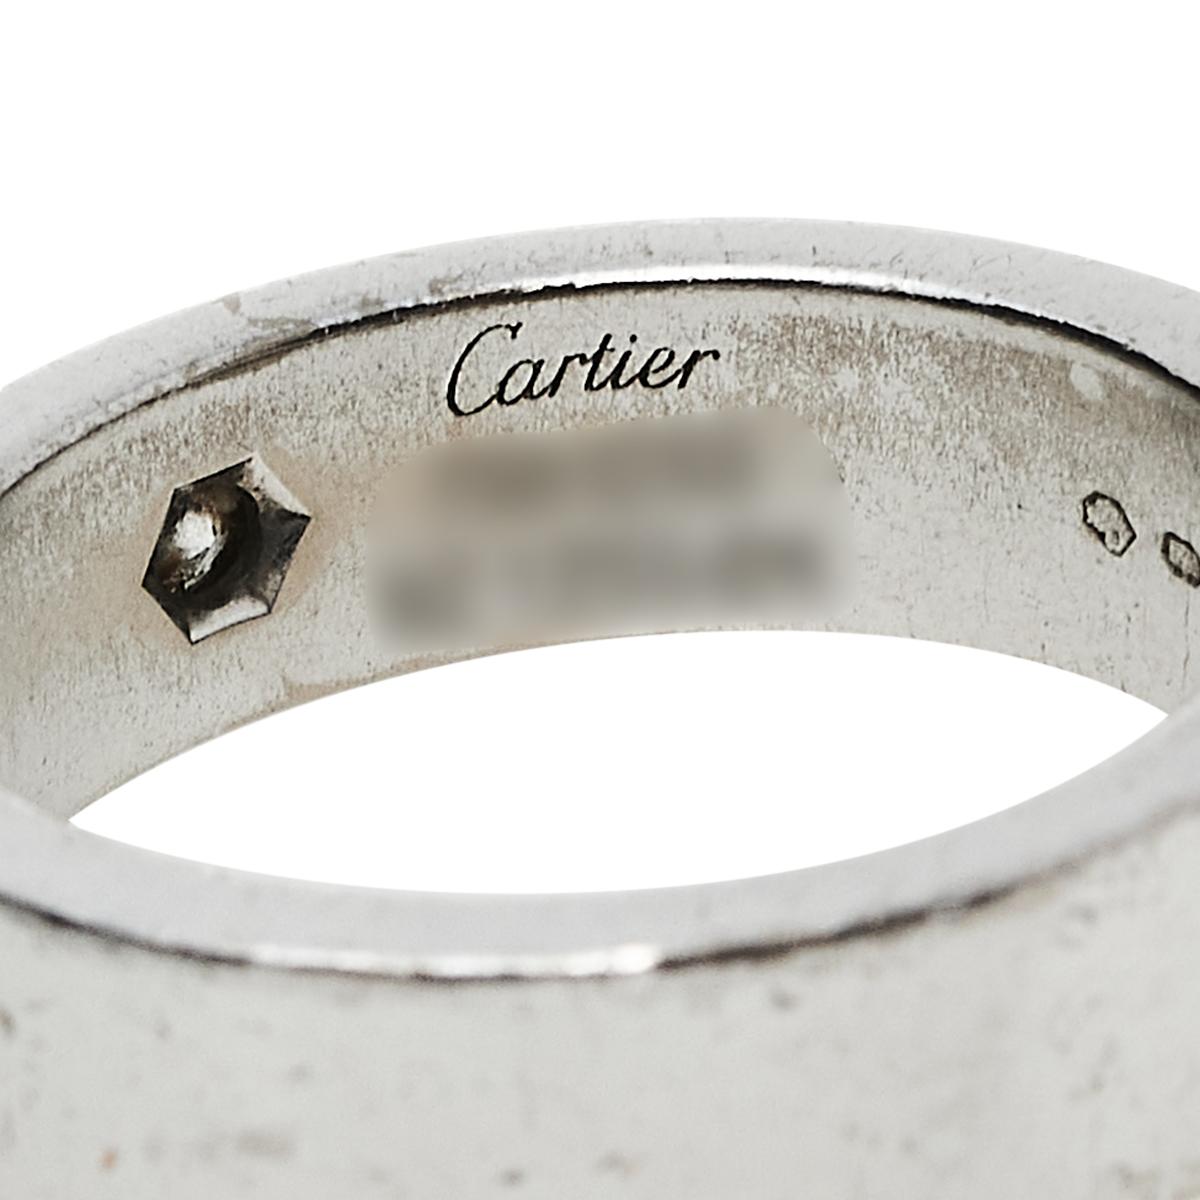 Cartier Love Diamond 18K White Gold Band Ring Size 53 2